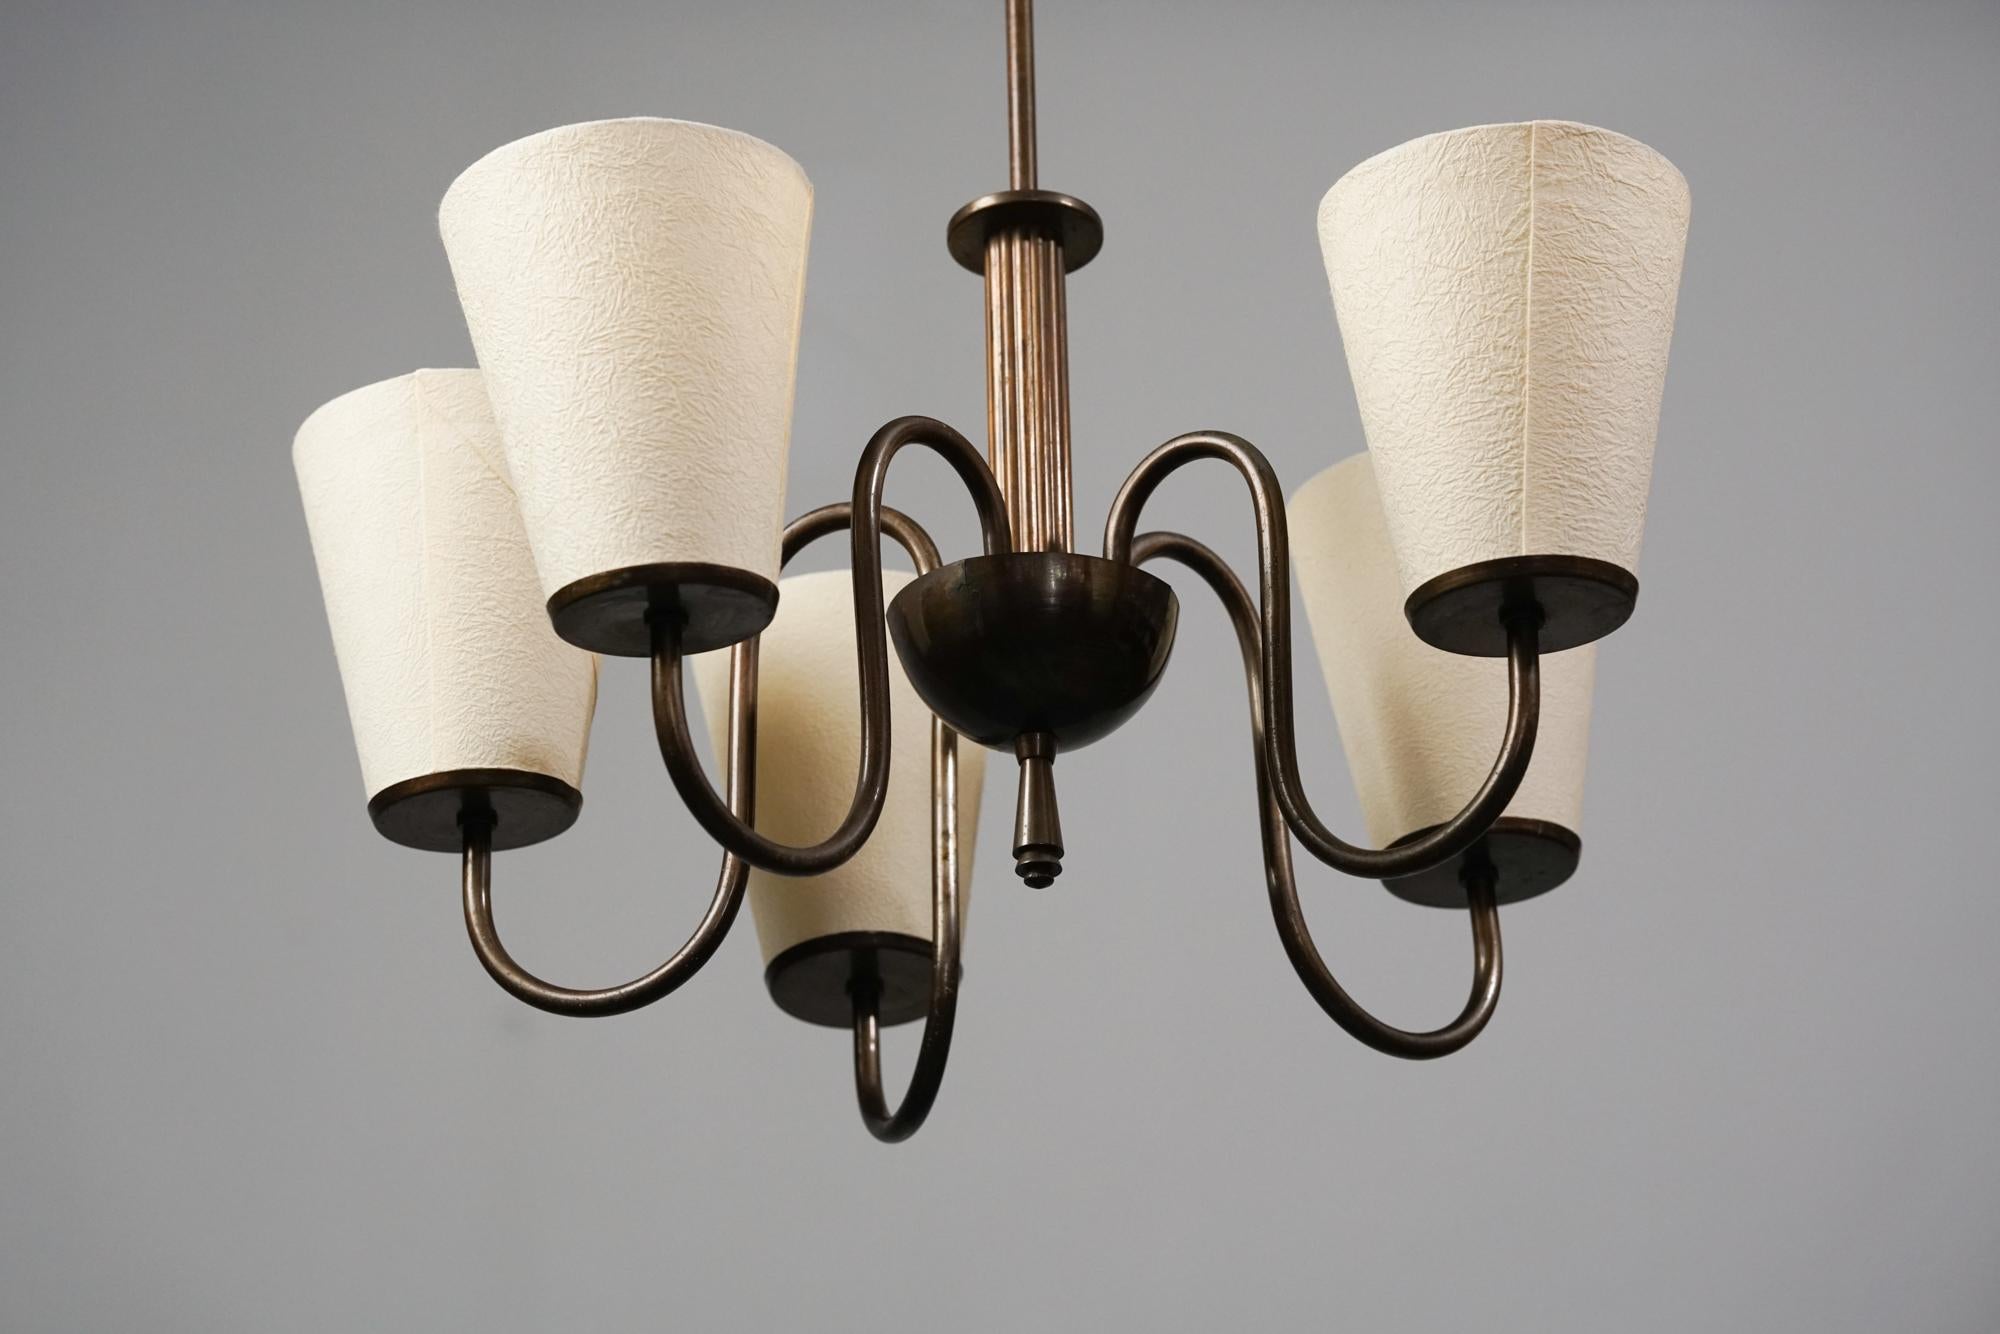 Paavo Tynell pendant model 1419 for Taito Oy from the 1930s. Bronze frame with fabric shades. The lampshades are not original. Good vintage condition, minor patina consistent with age and use. Classic Paavo Tynell pendant with a  Scandinavian Modern